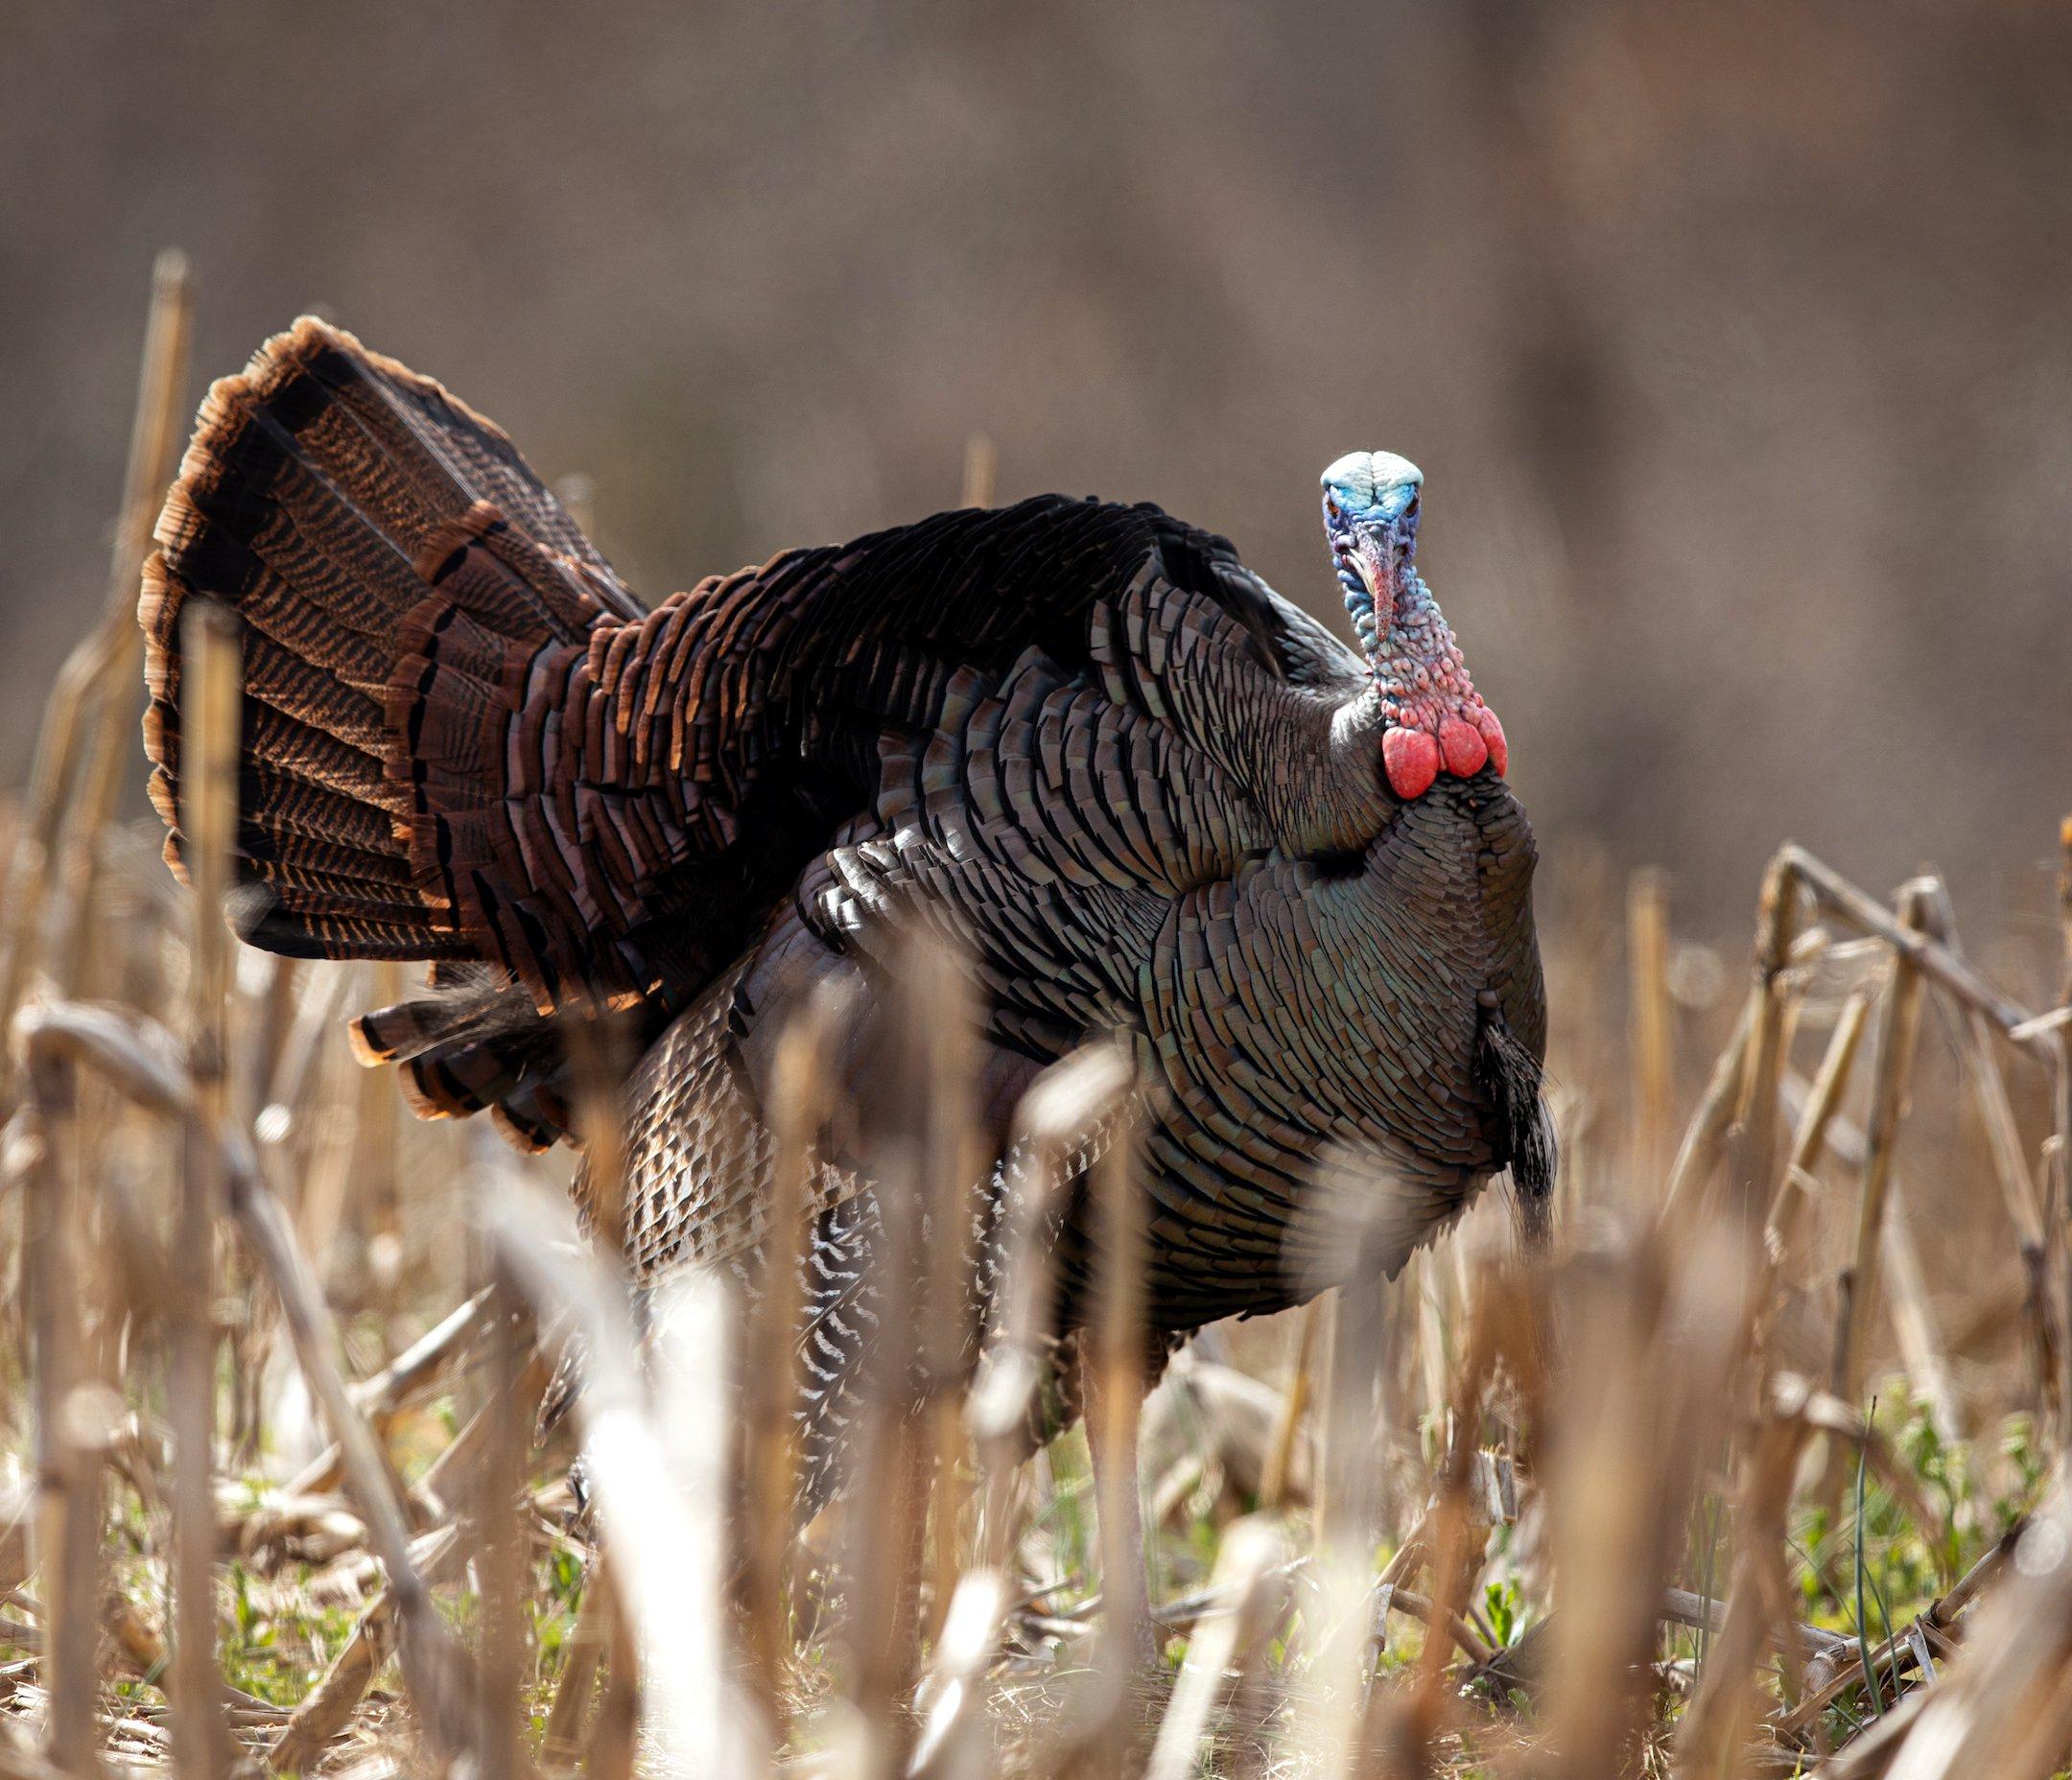 Turkey movement across the Midwest is erratic due to a recent heat wave. Image by Kerry Wix